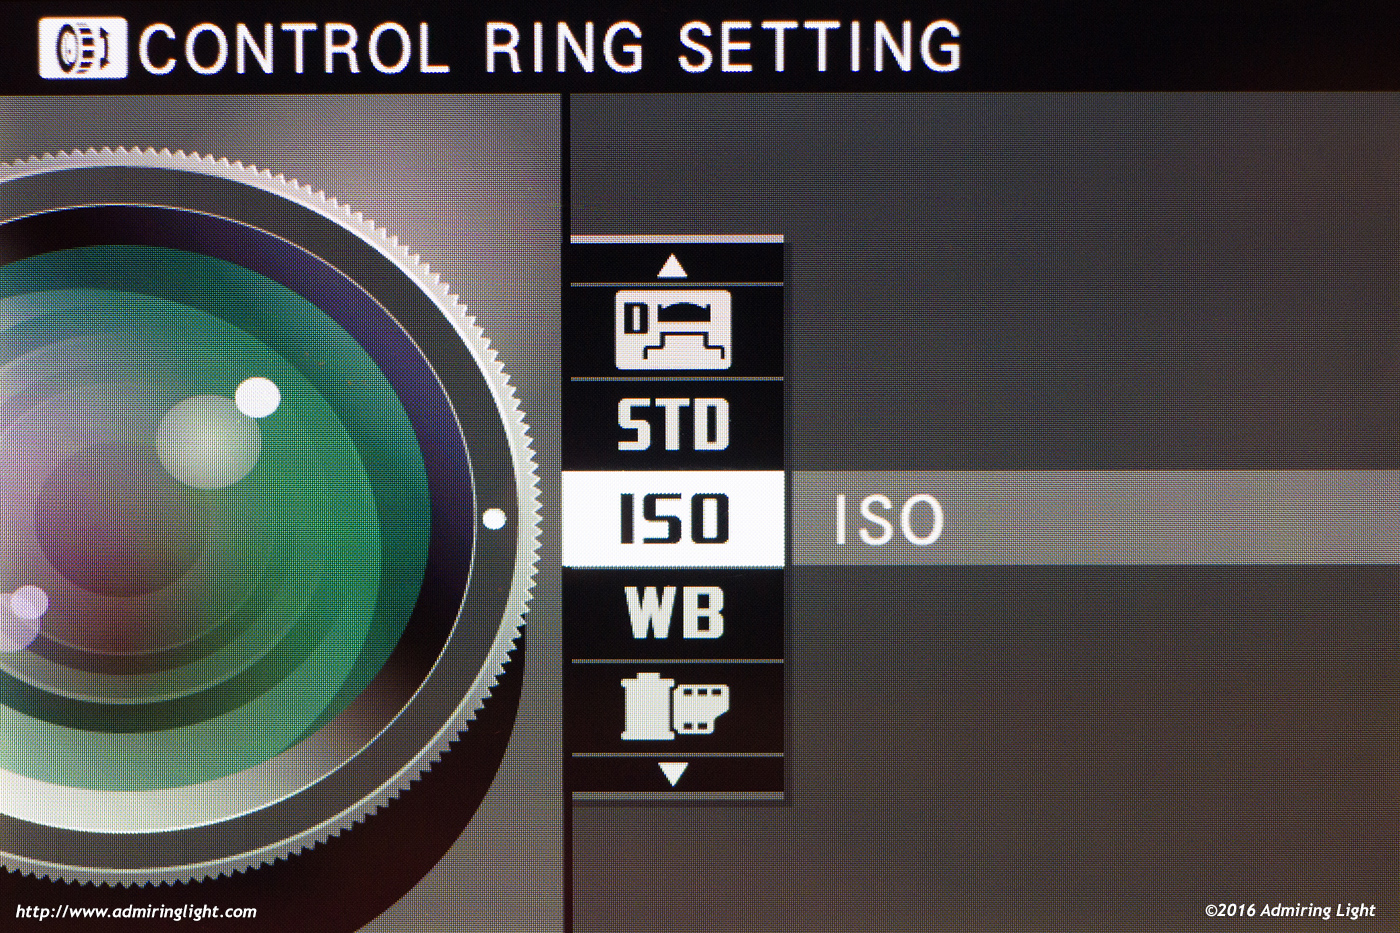 The front control ring can be set to adjust a multitude of options